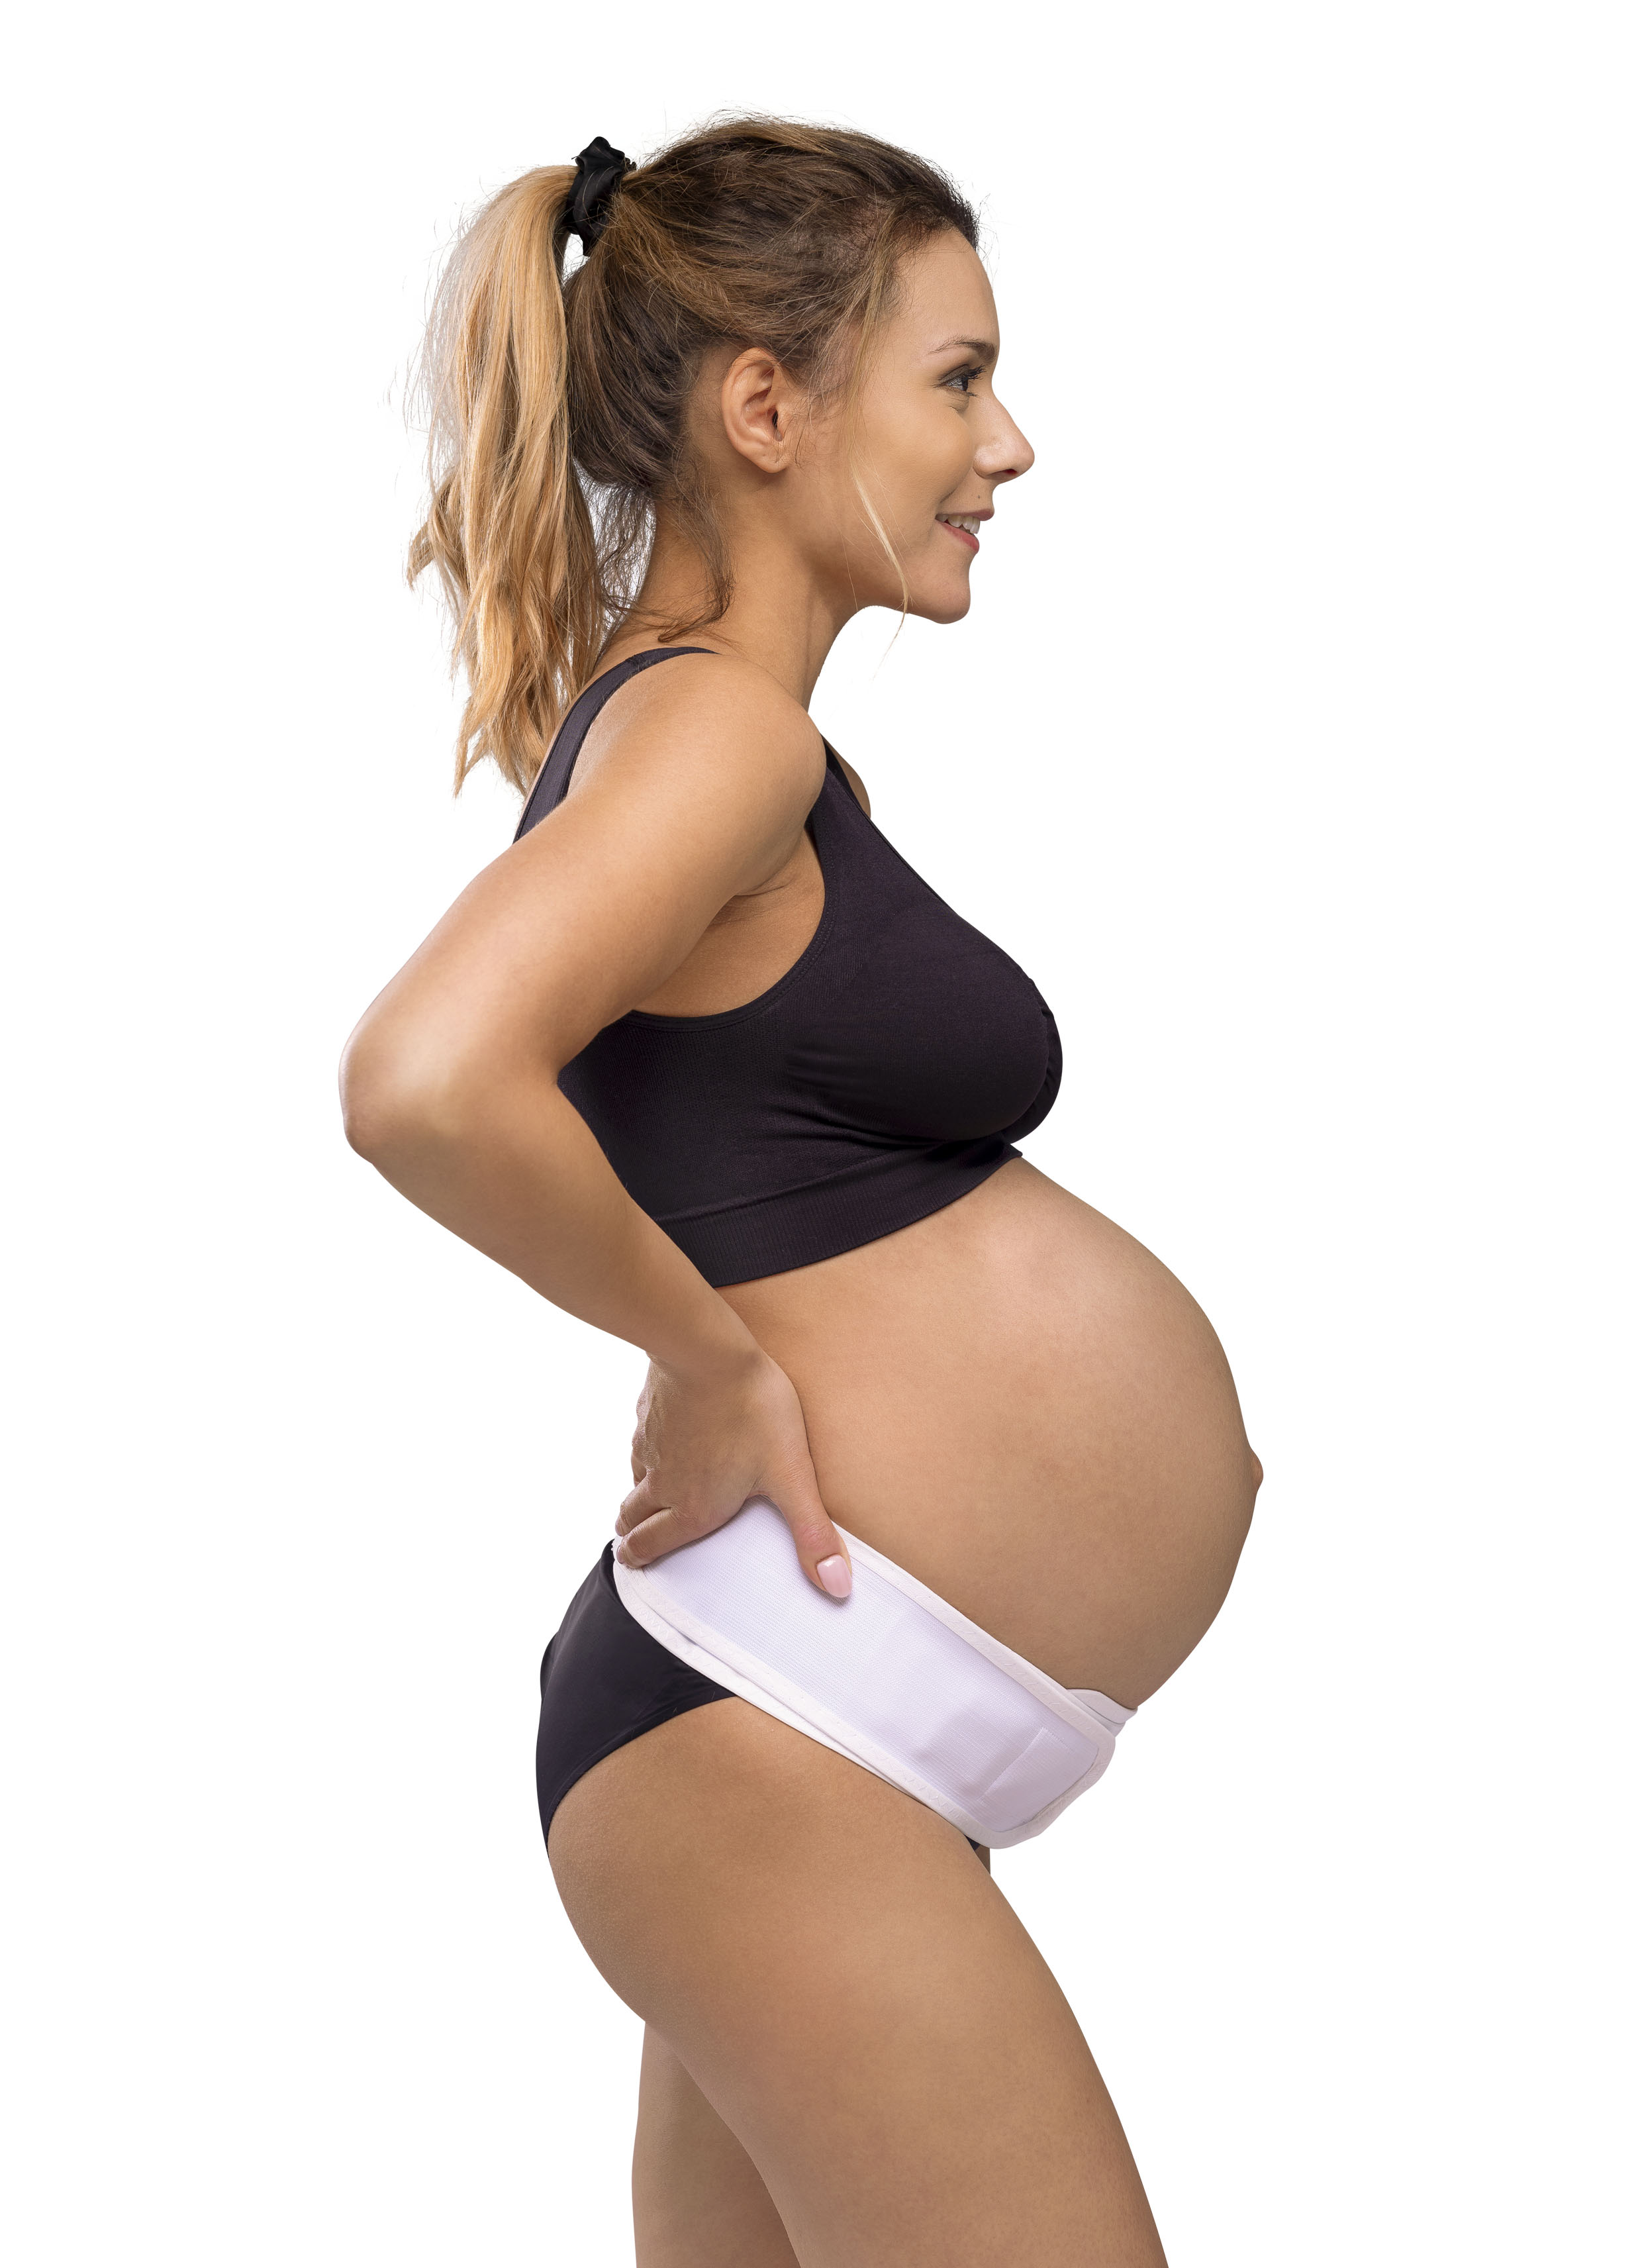 https://www.mamidea.com/pictures/carriwell_maternity_support_belt-06554821640361.jpg